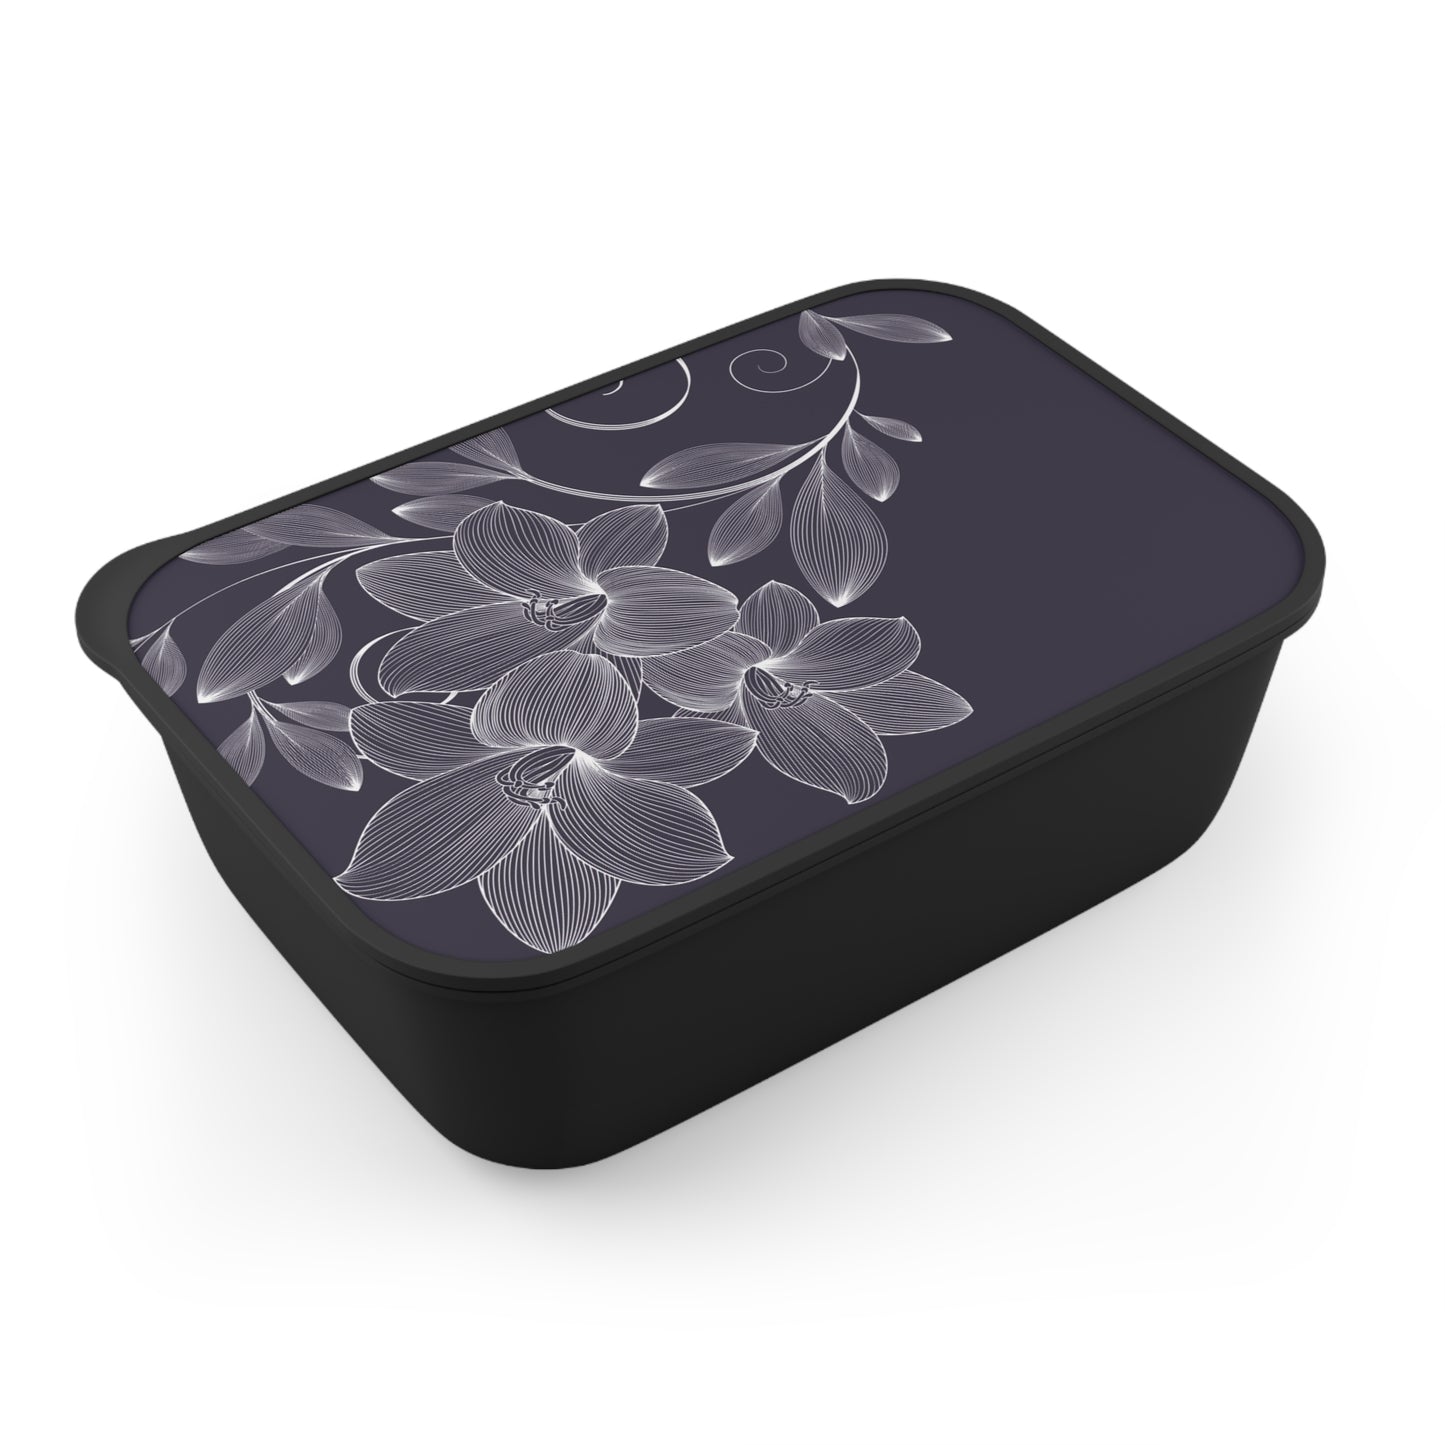 Flower Bento Box with Band and Utensils